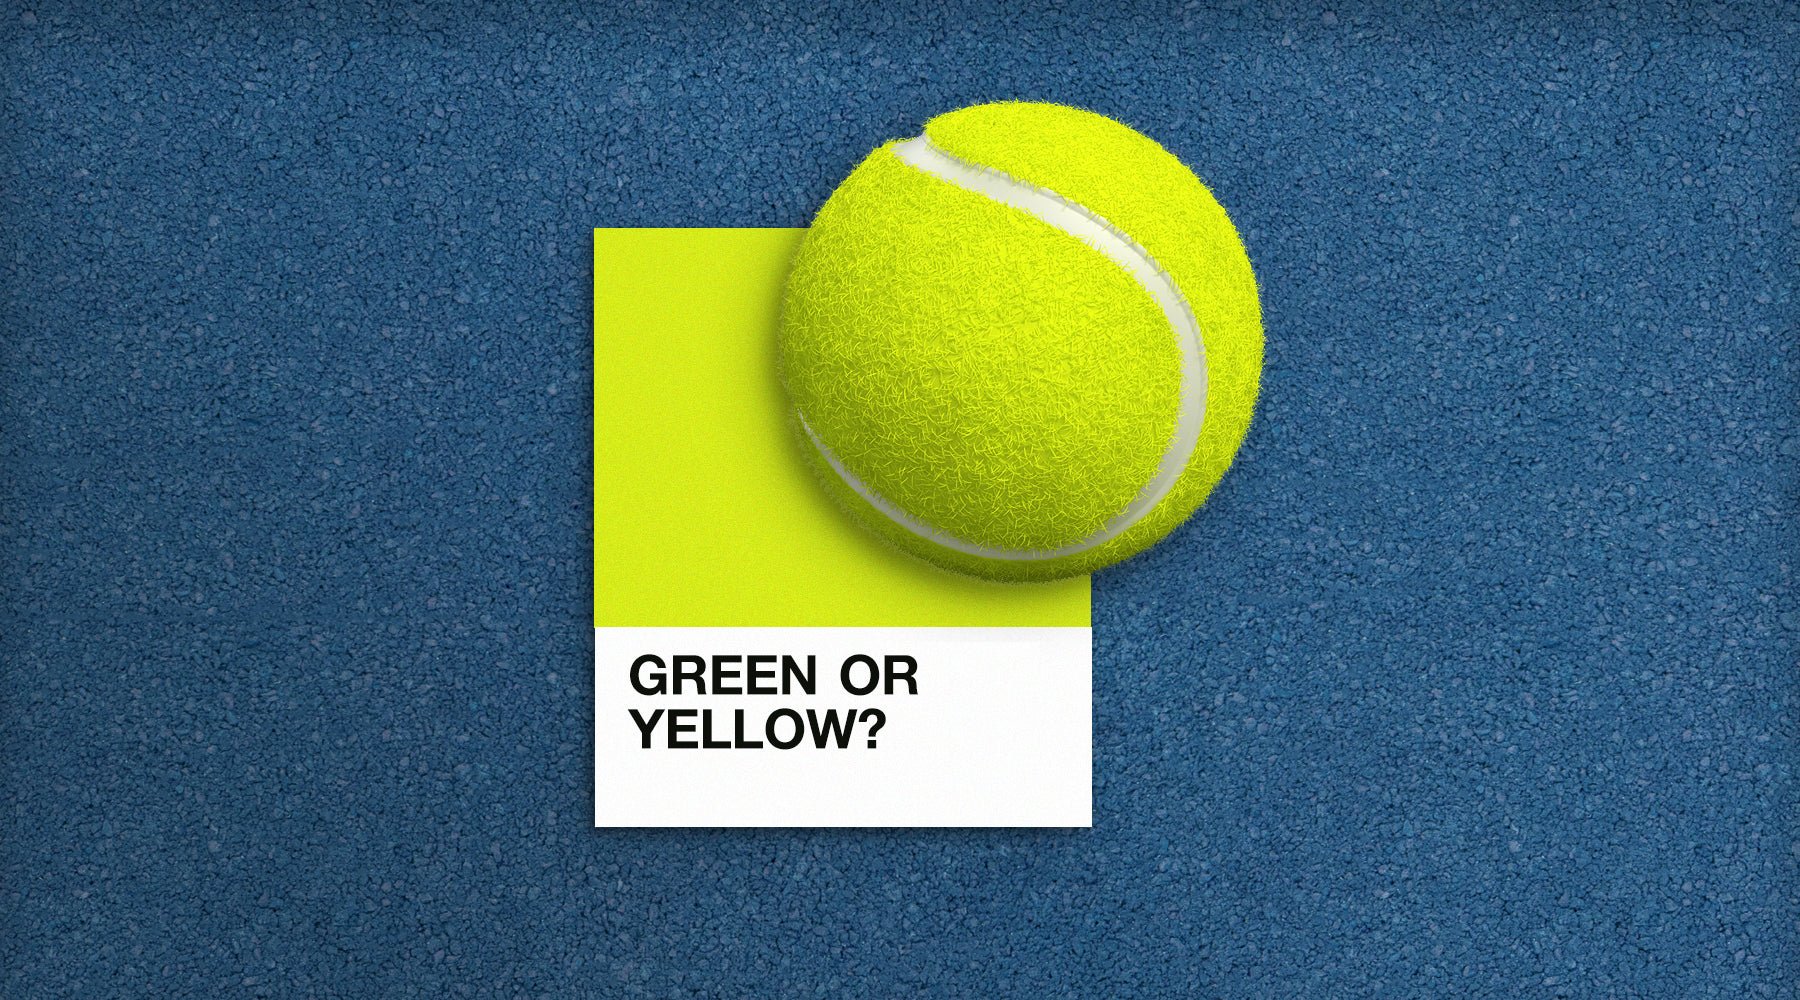 What Color is a Tennis Ball? – Jgame